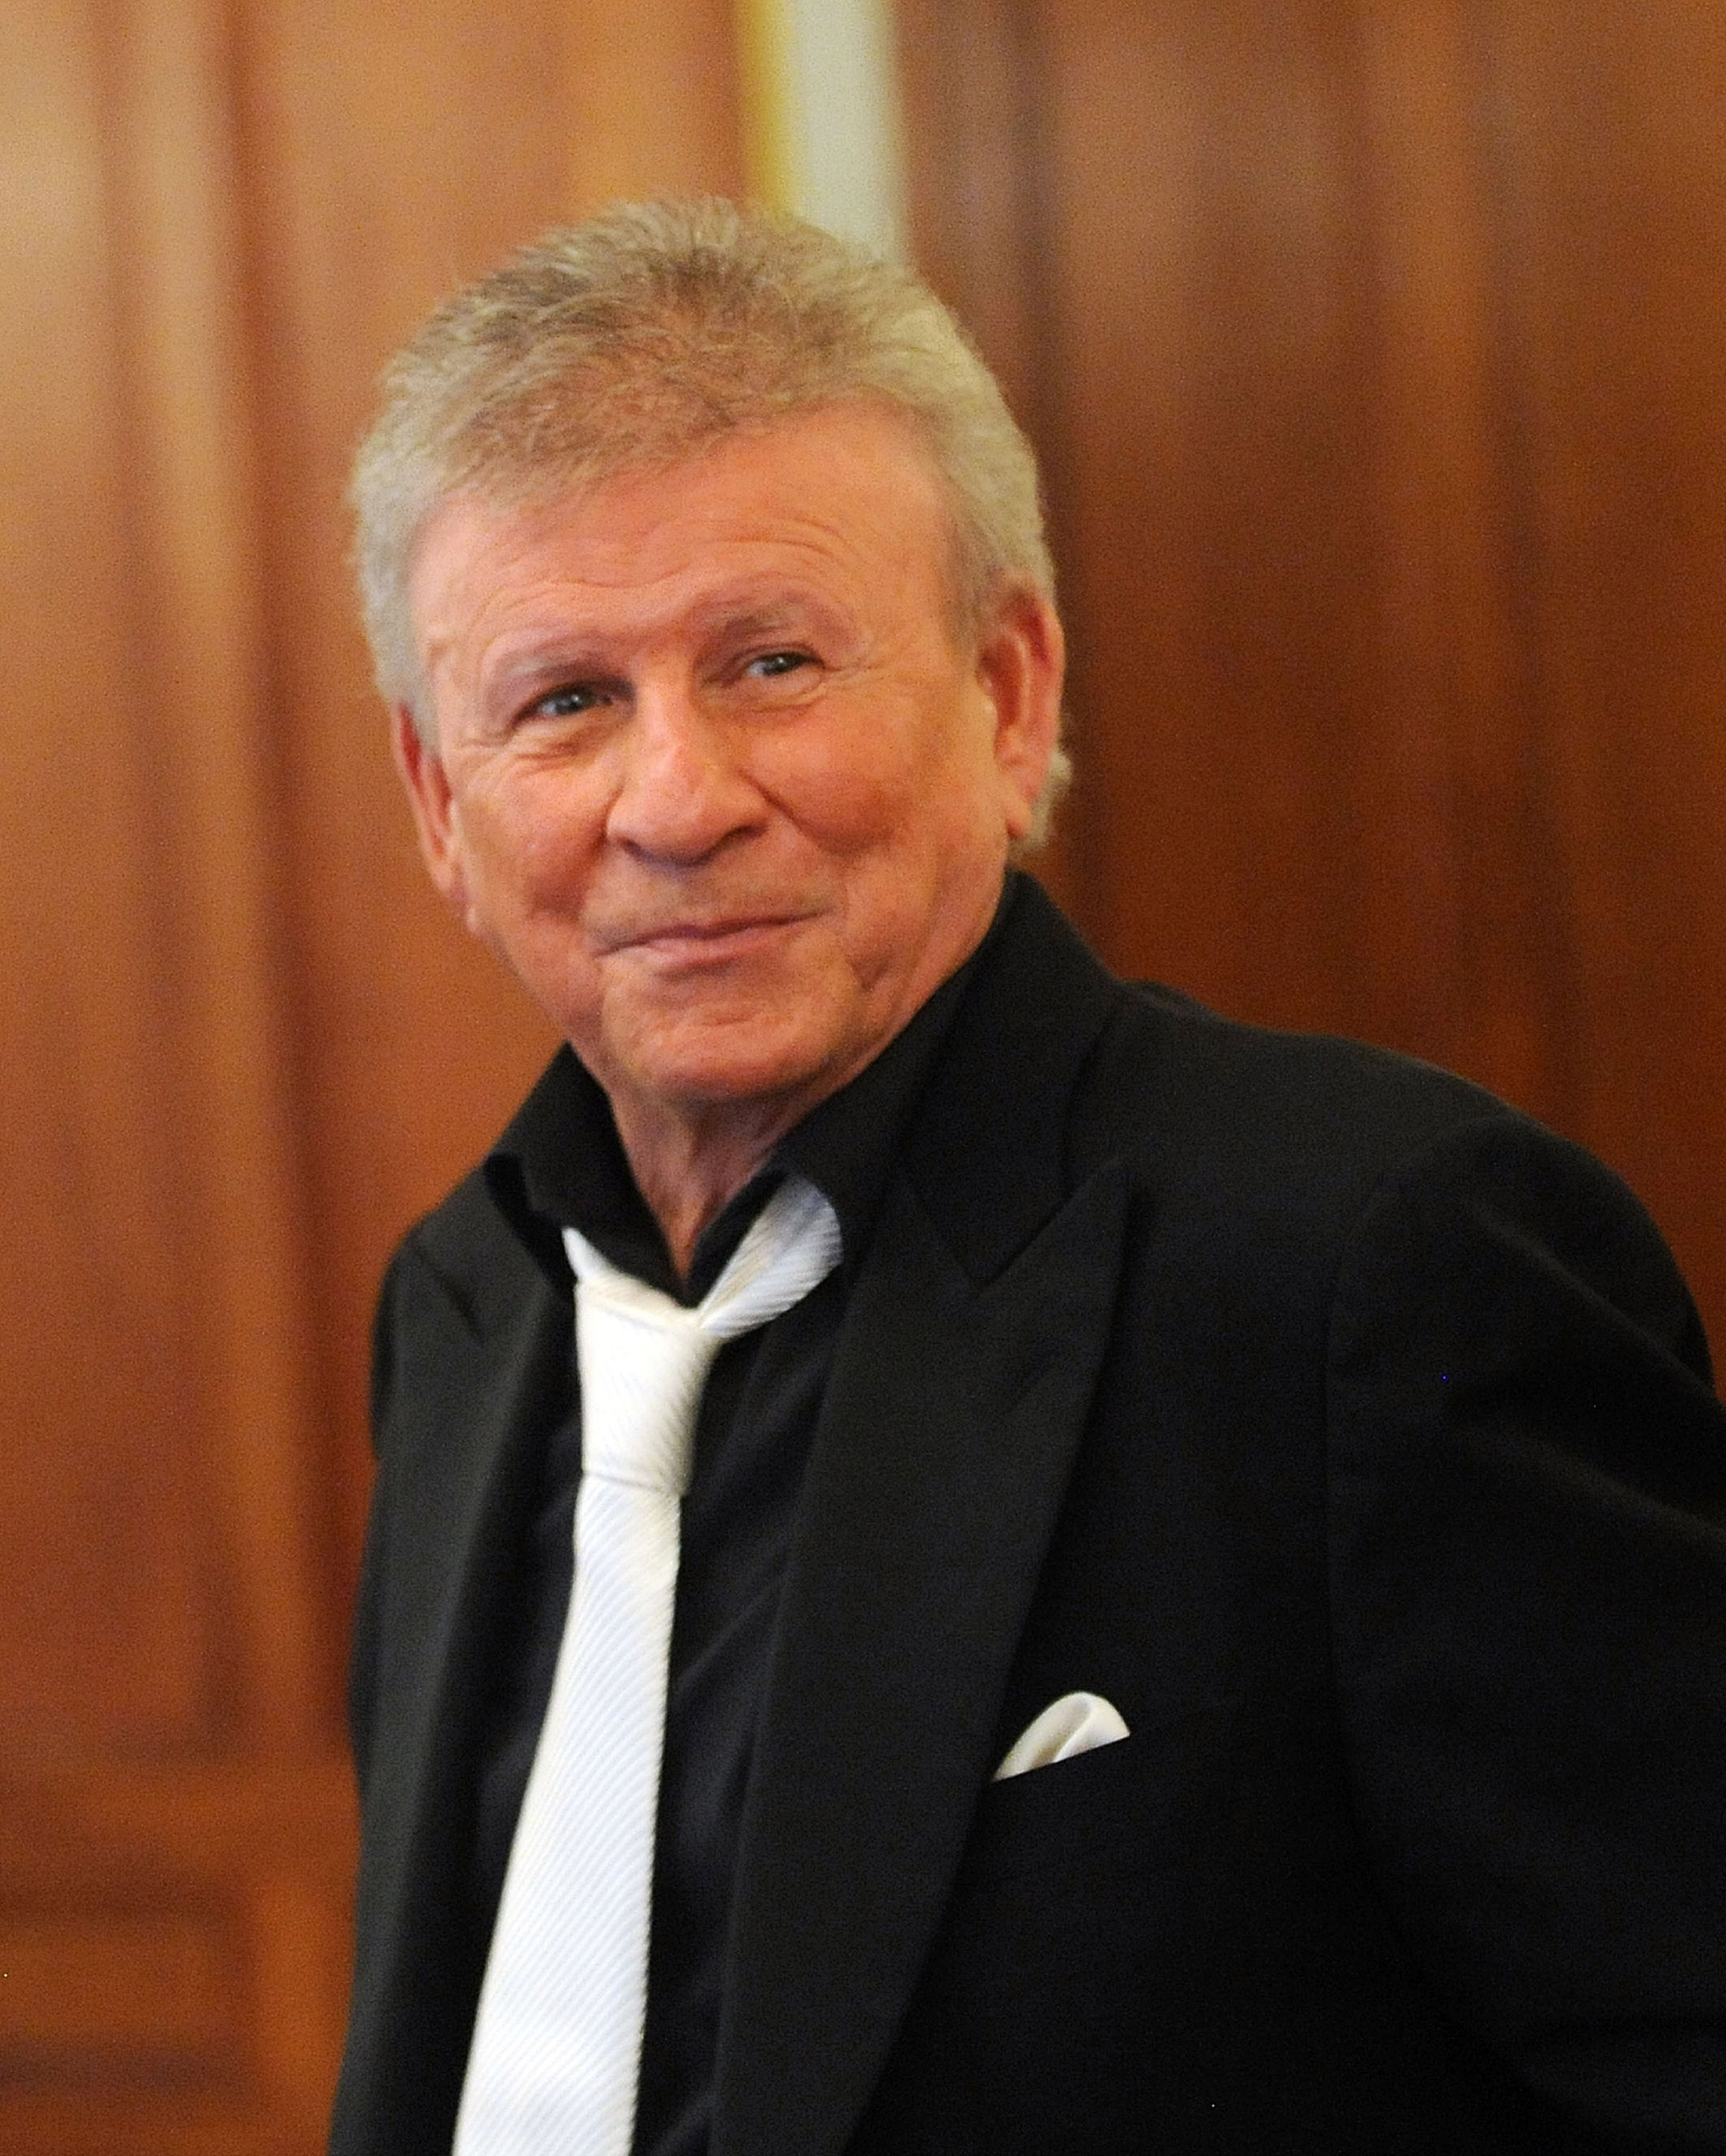 Bobby Rydell attends Oleg Frish CD Release Party "Duets With My American Idols" on May 20, 2015 in New York, New York. | Source: Getty Images